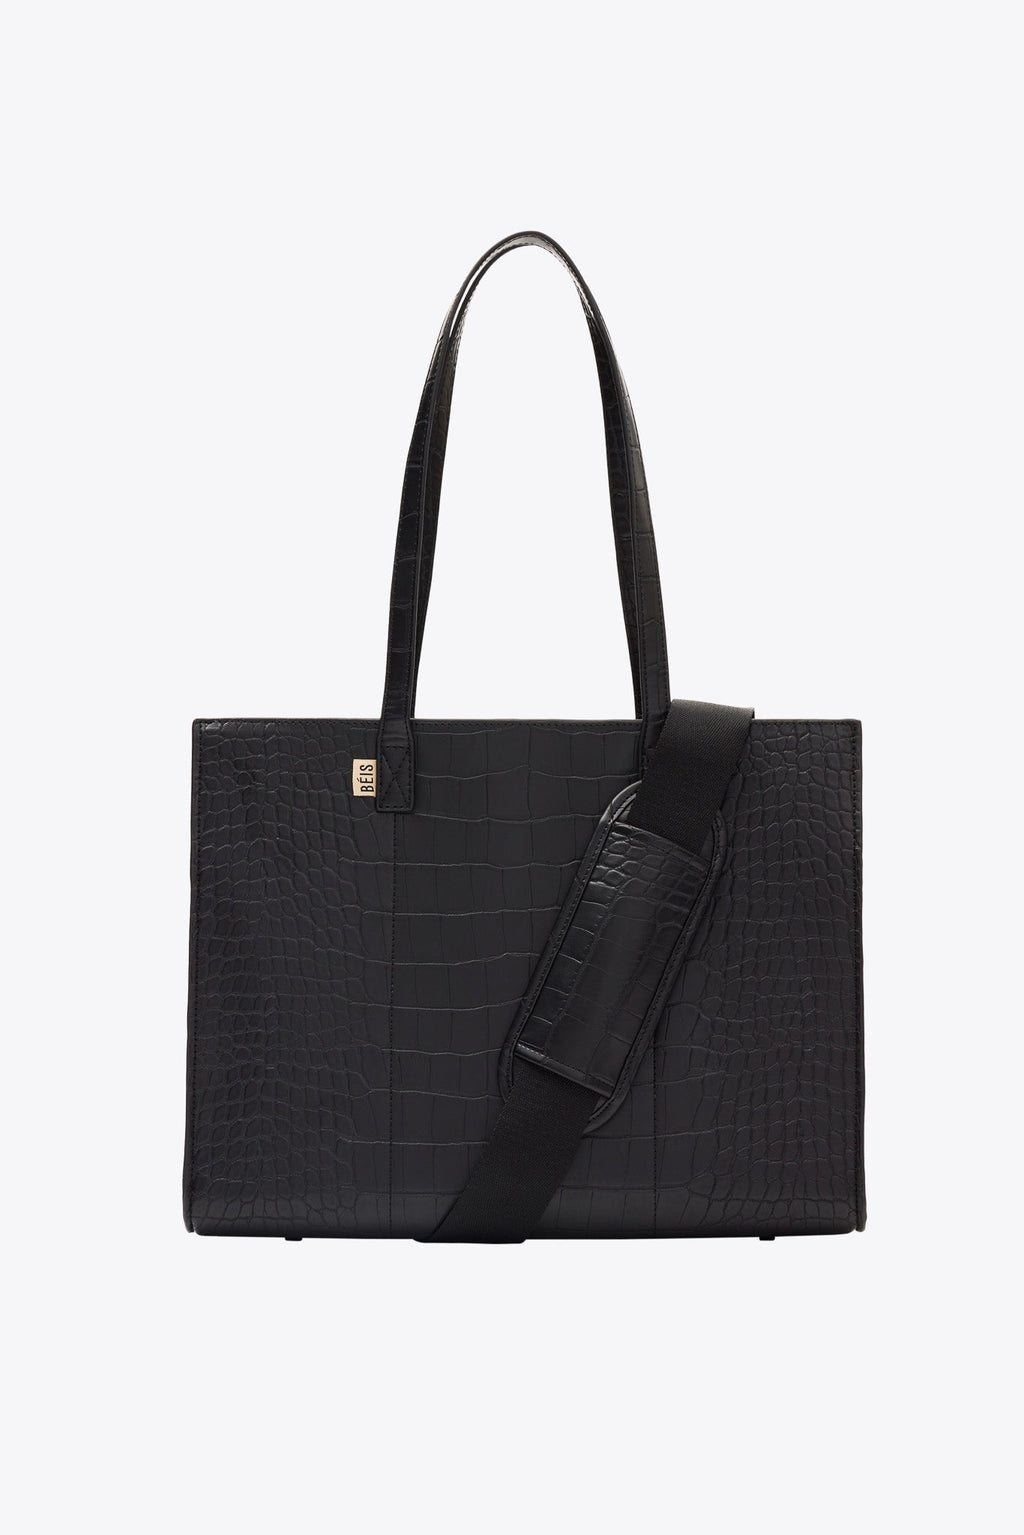 Allyn Tote - Leather Tote for Work & Weekends